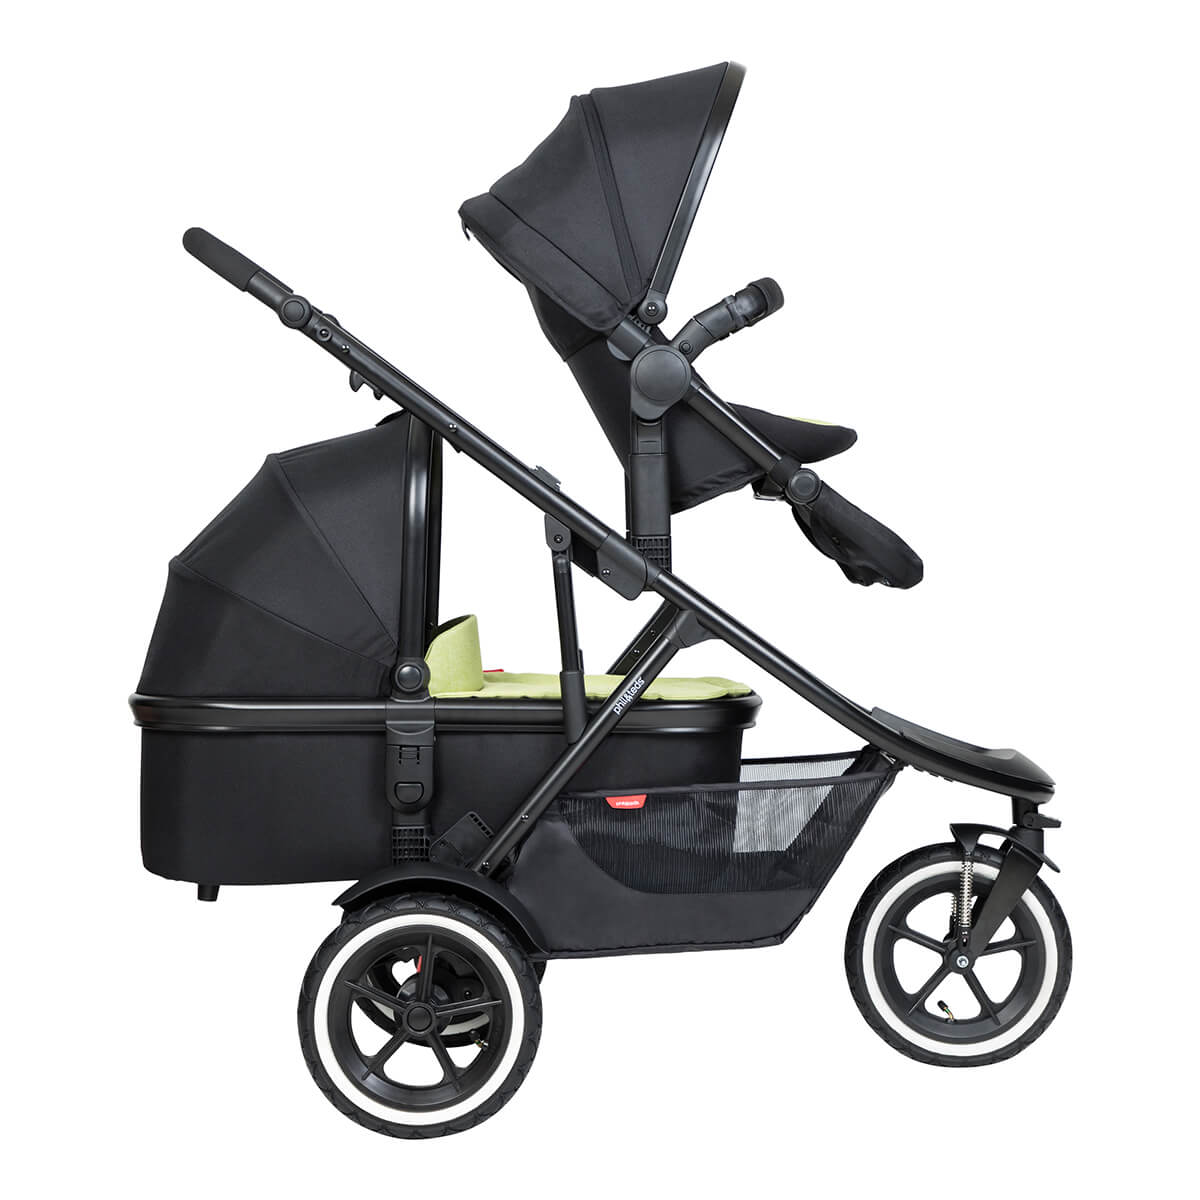 https://cdn.accentuate.io/7671658676402/19437753499826/philteds-sport-buggy-with-double-kit-extended-clip-and-snug-carrycot-side-view-v1682472778923.jpg?1200x1200